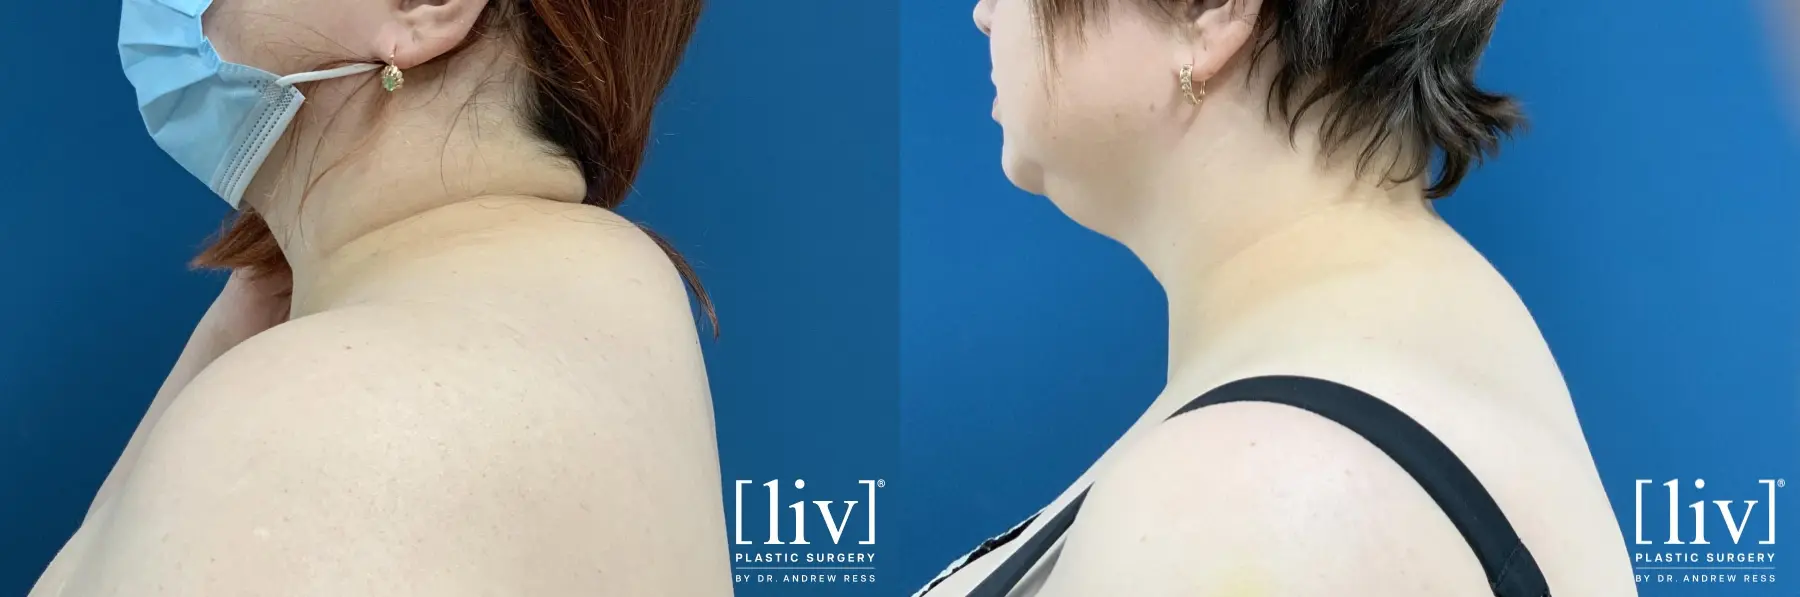 Posterior Neck Liposuction - Before and After 2